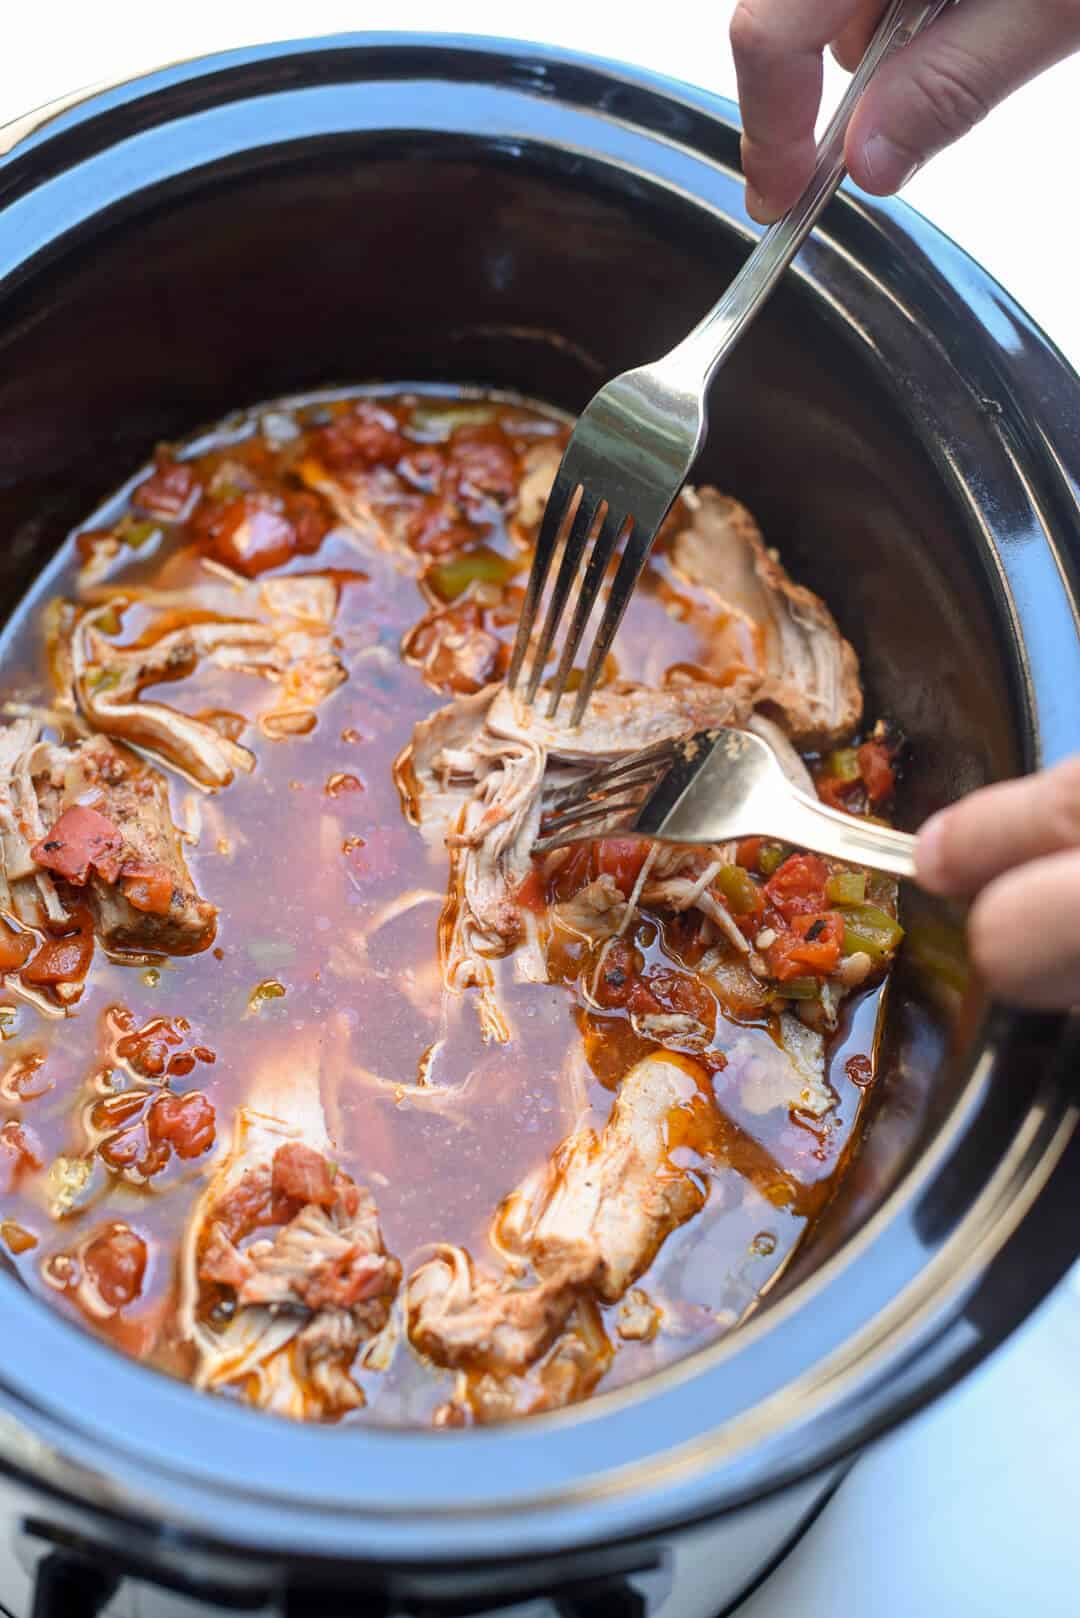 A fork pushes into a tender piece of cooked pork in a slow cooker.